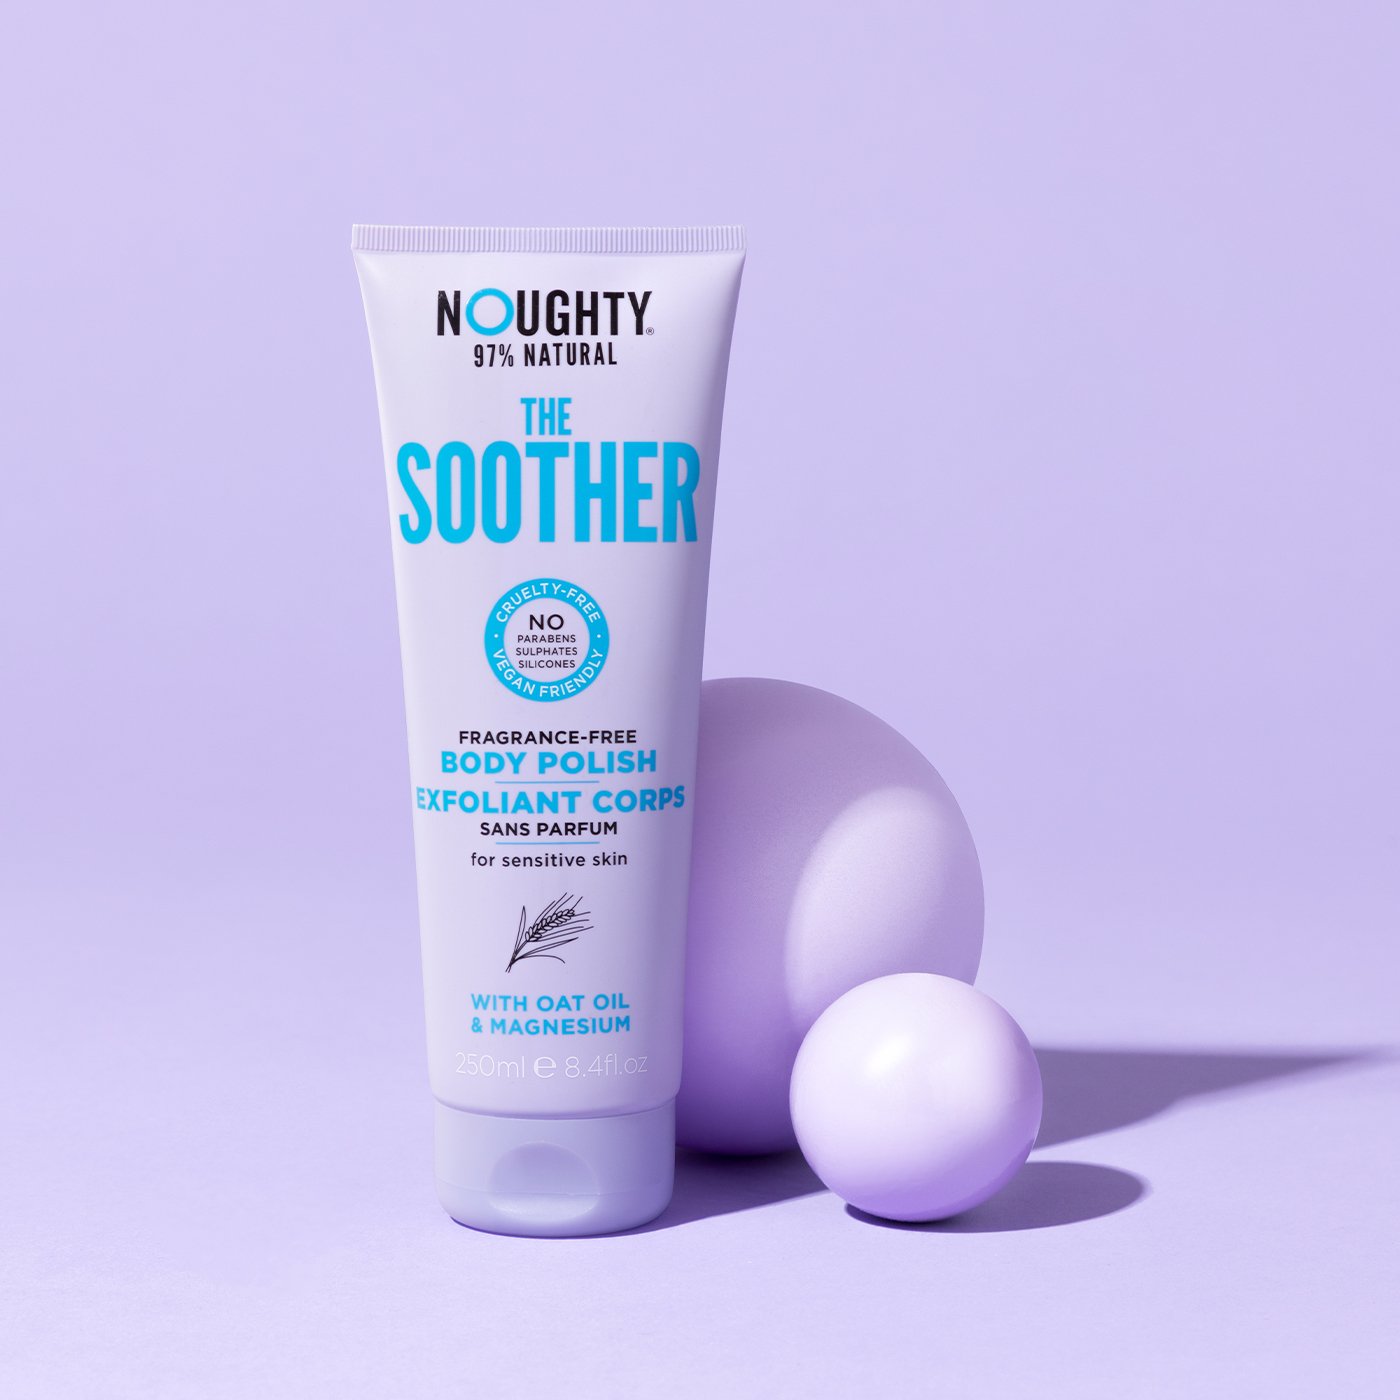 Noughty The Soother fragrance free body polish exfoliator for sensitive and reactive skin. Natural body care vegan cruelty free natural sulfate free paraben free